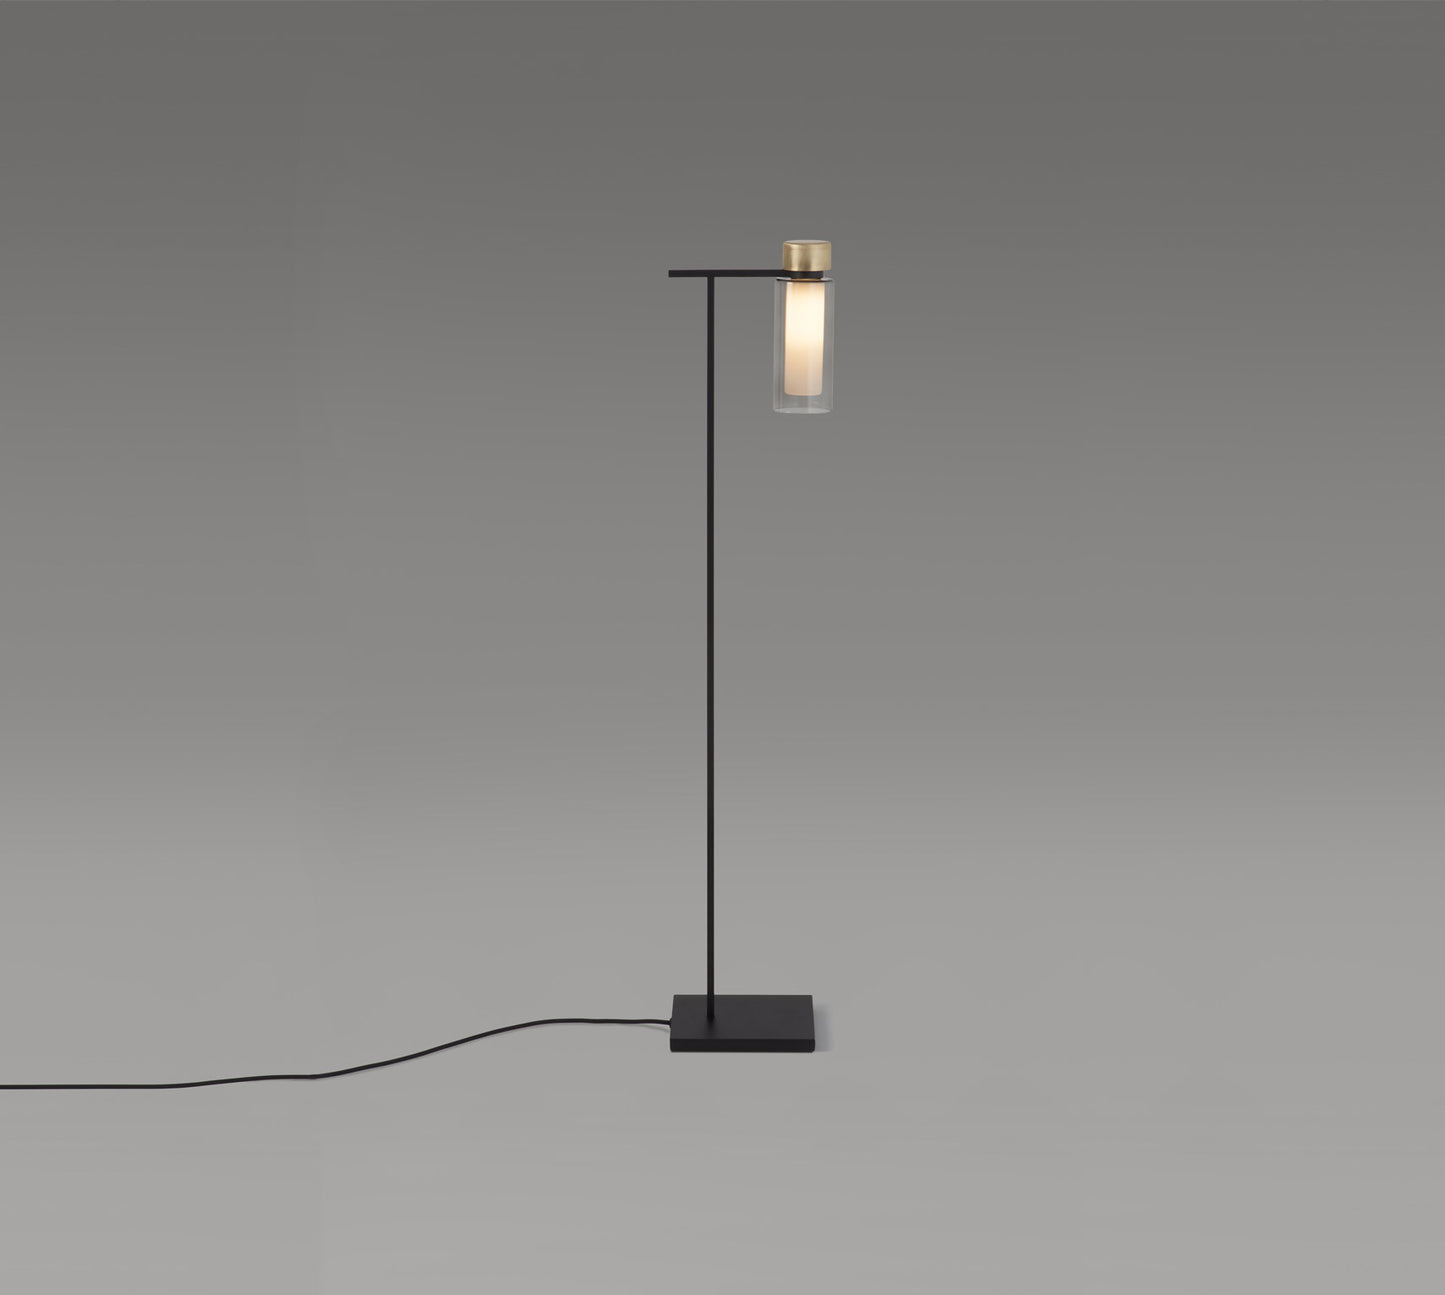 OSMAN FLOOR LAMP BY TOOY from $1,550.00